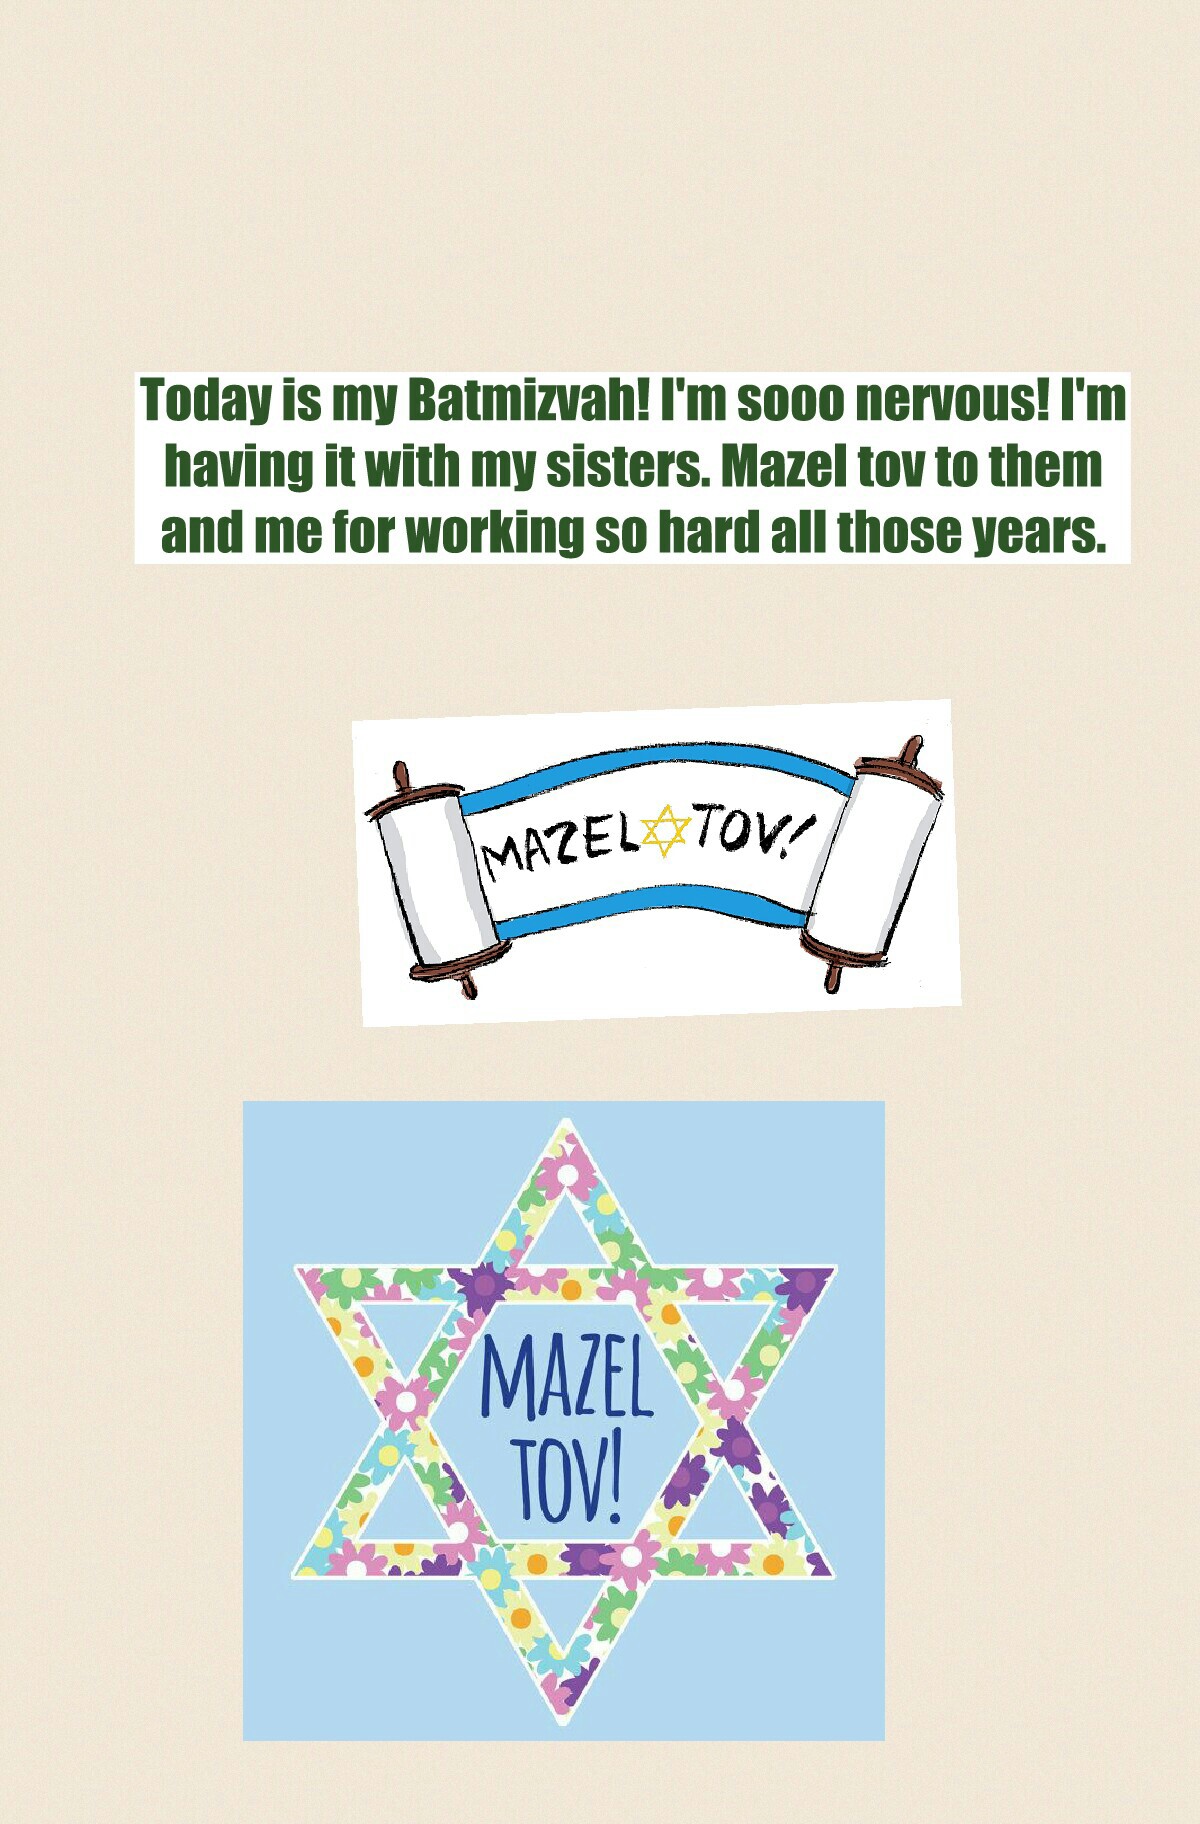 Today is my Batmizvah! I'm sooo nervous! I'm
having it with my sisters. Mazel tov to them
and me for working so hard all those years.